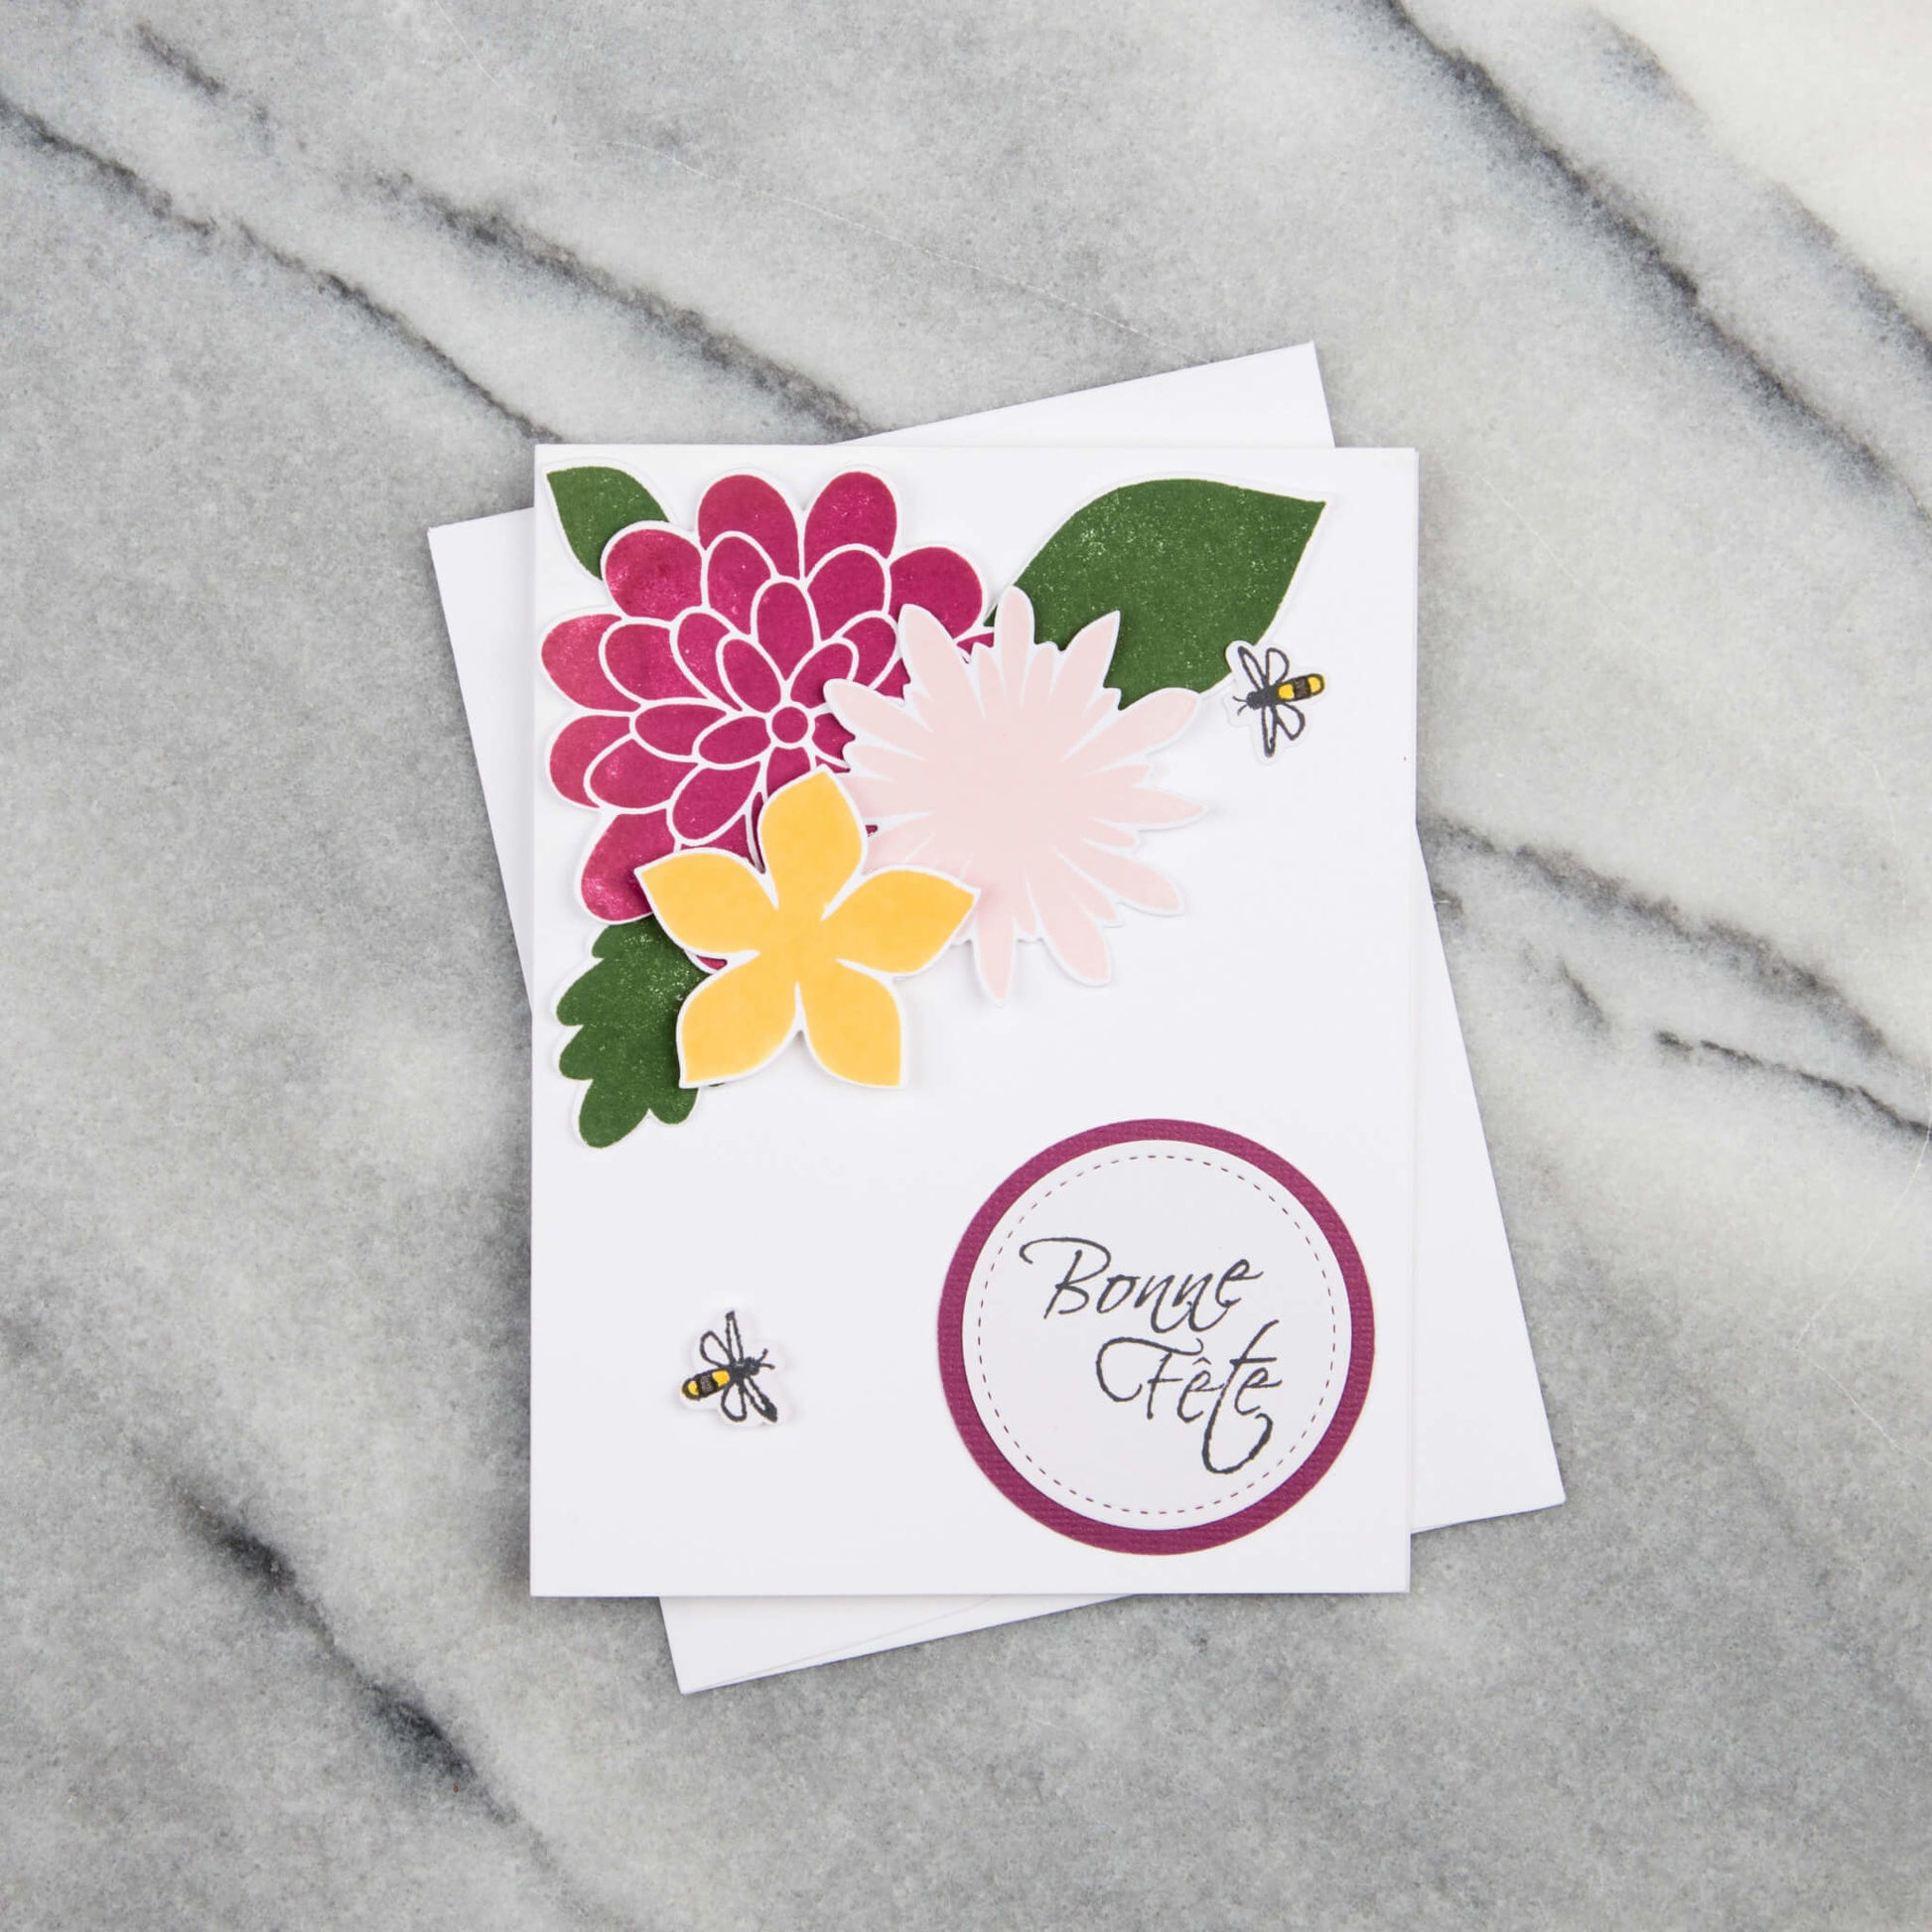 Pop-up birthday card with honeybee, 3 flowers and text that says happy birthday in French